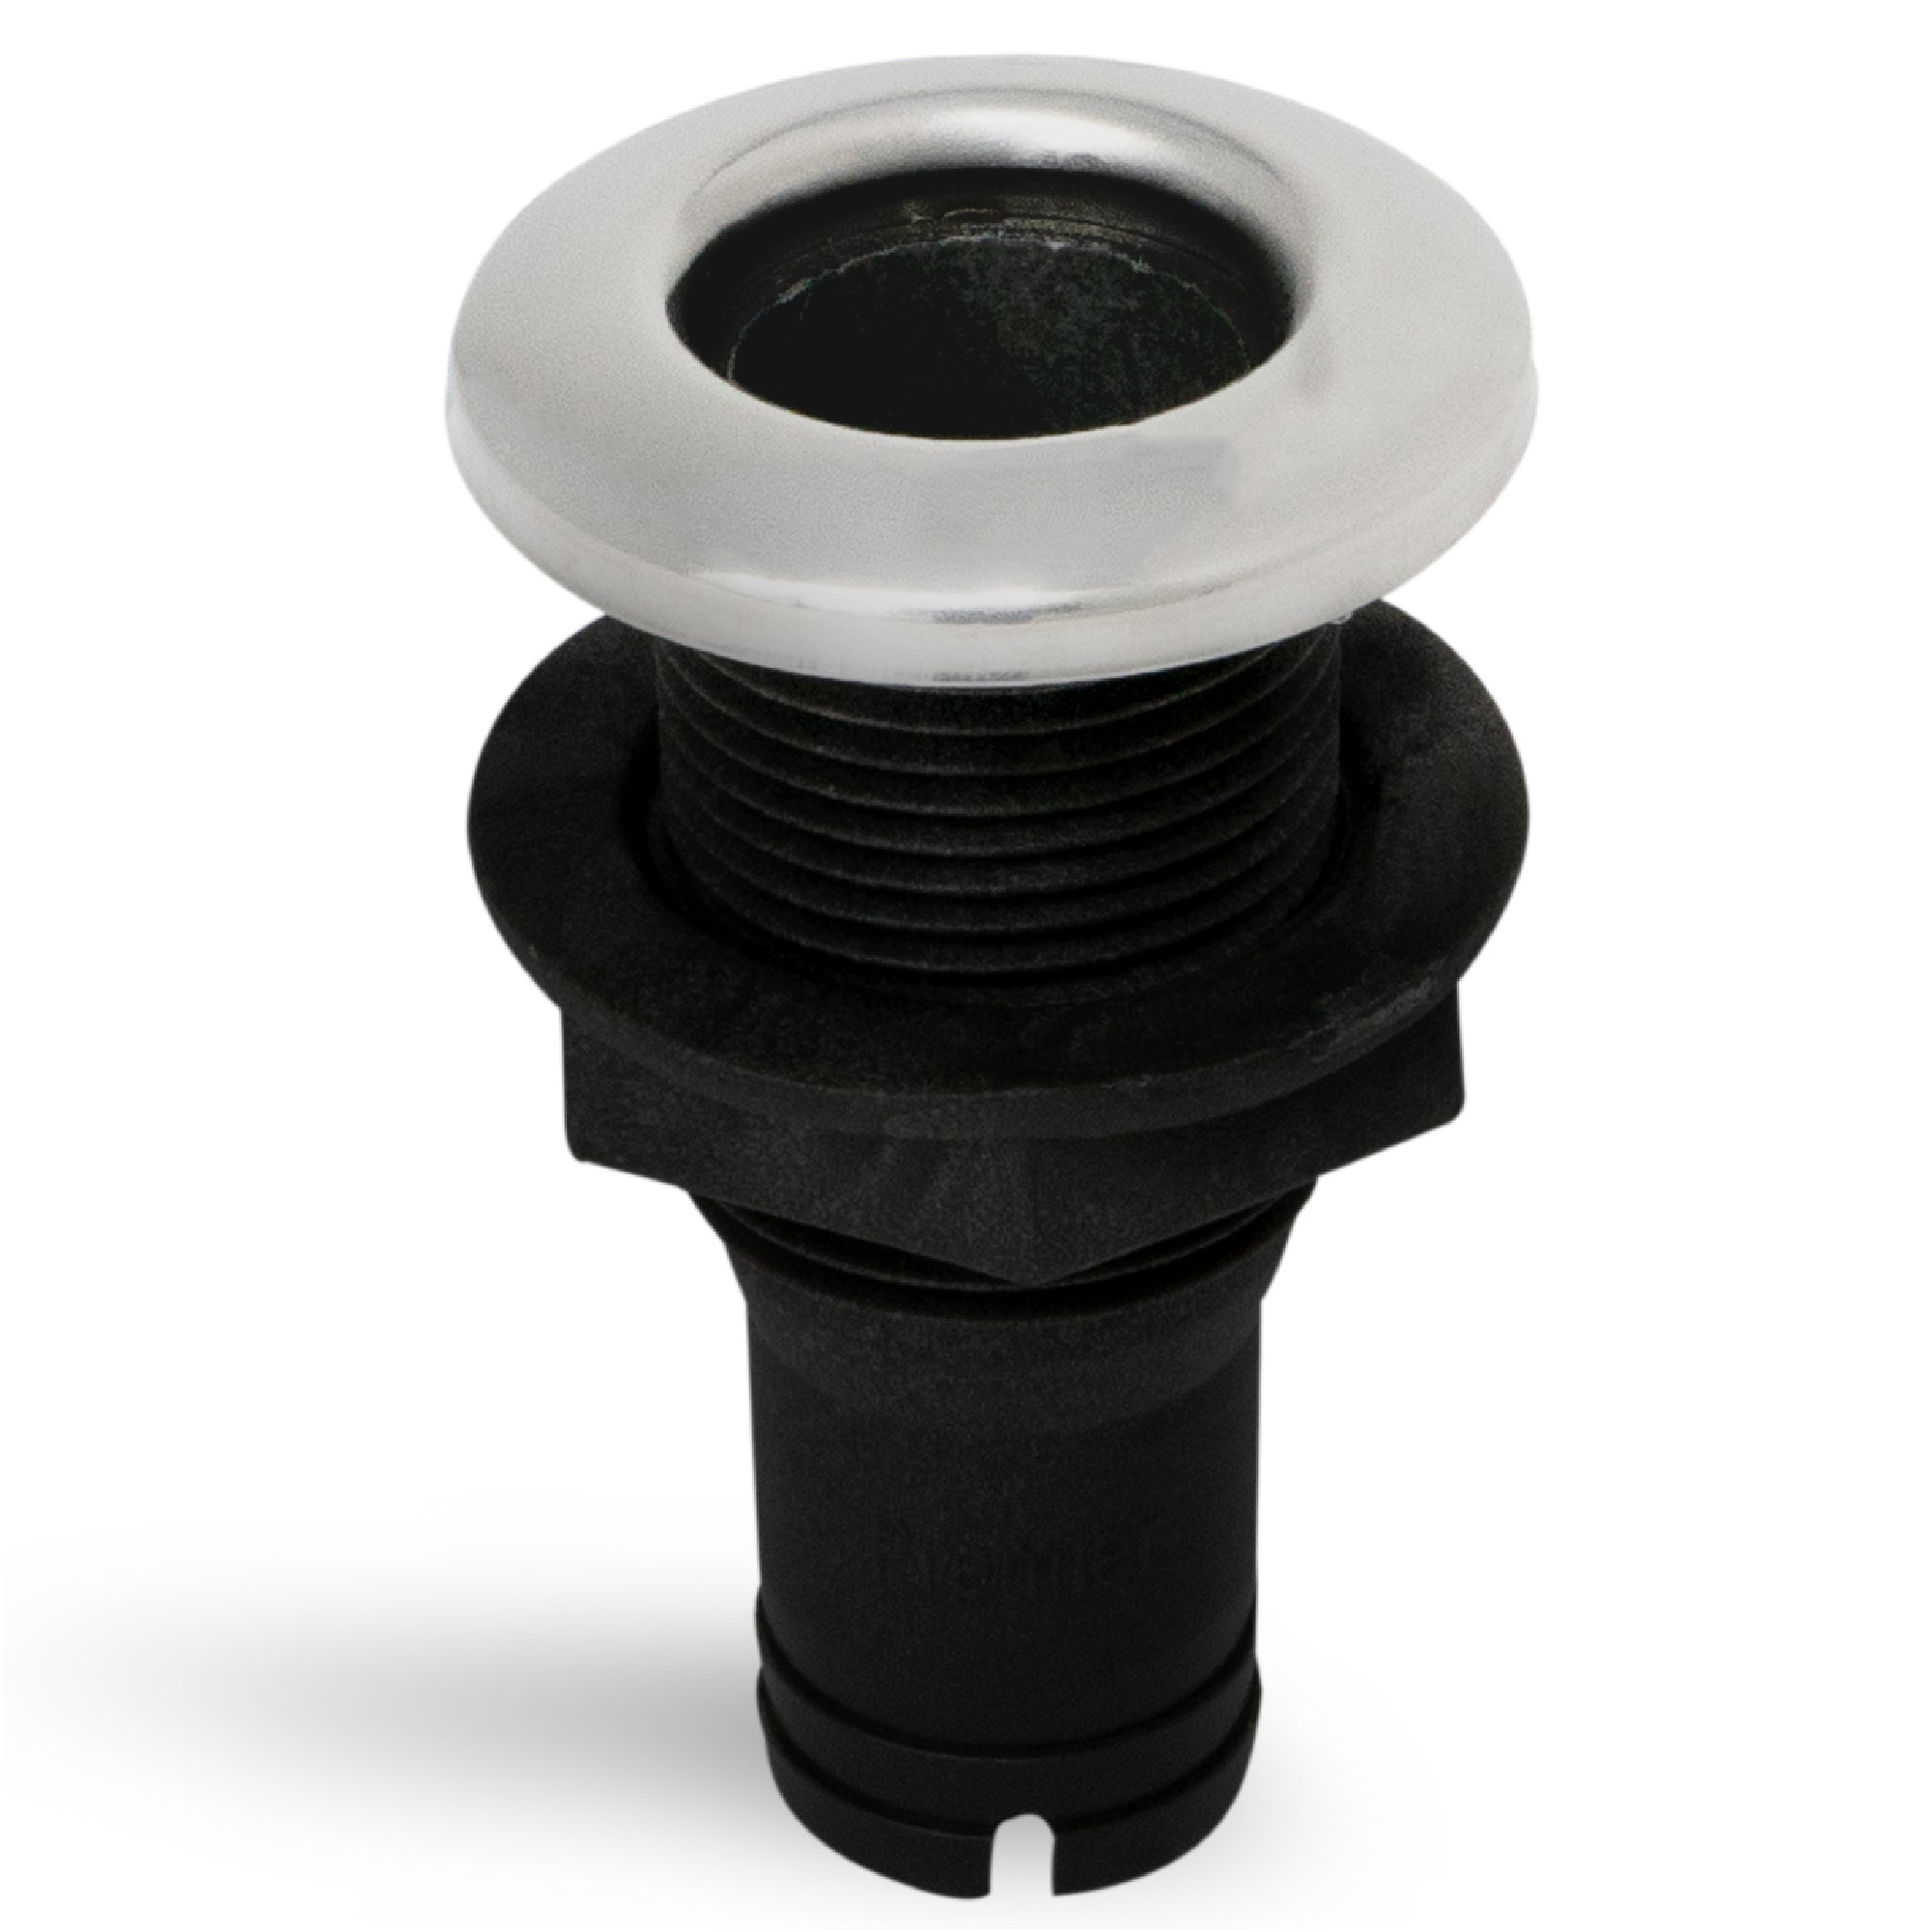 Thru-Hull Fitting Connection for Hose, 1" Black - FO2996